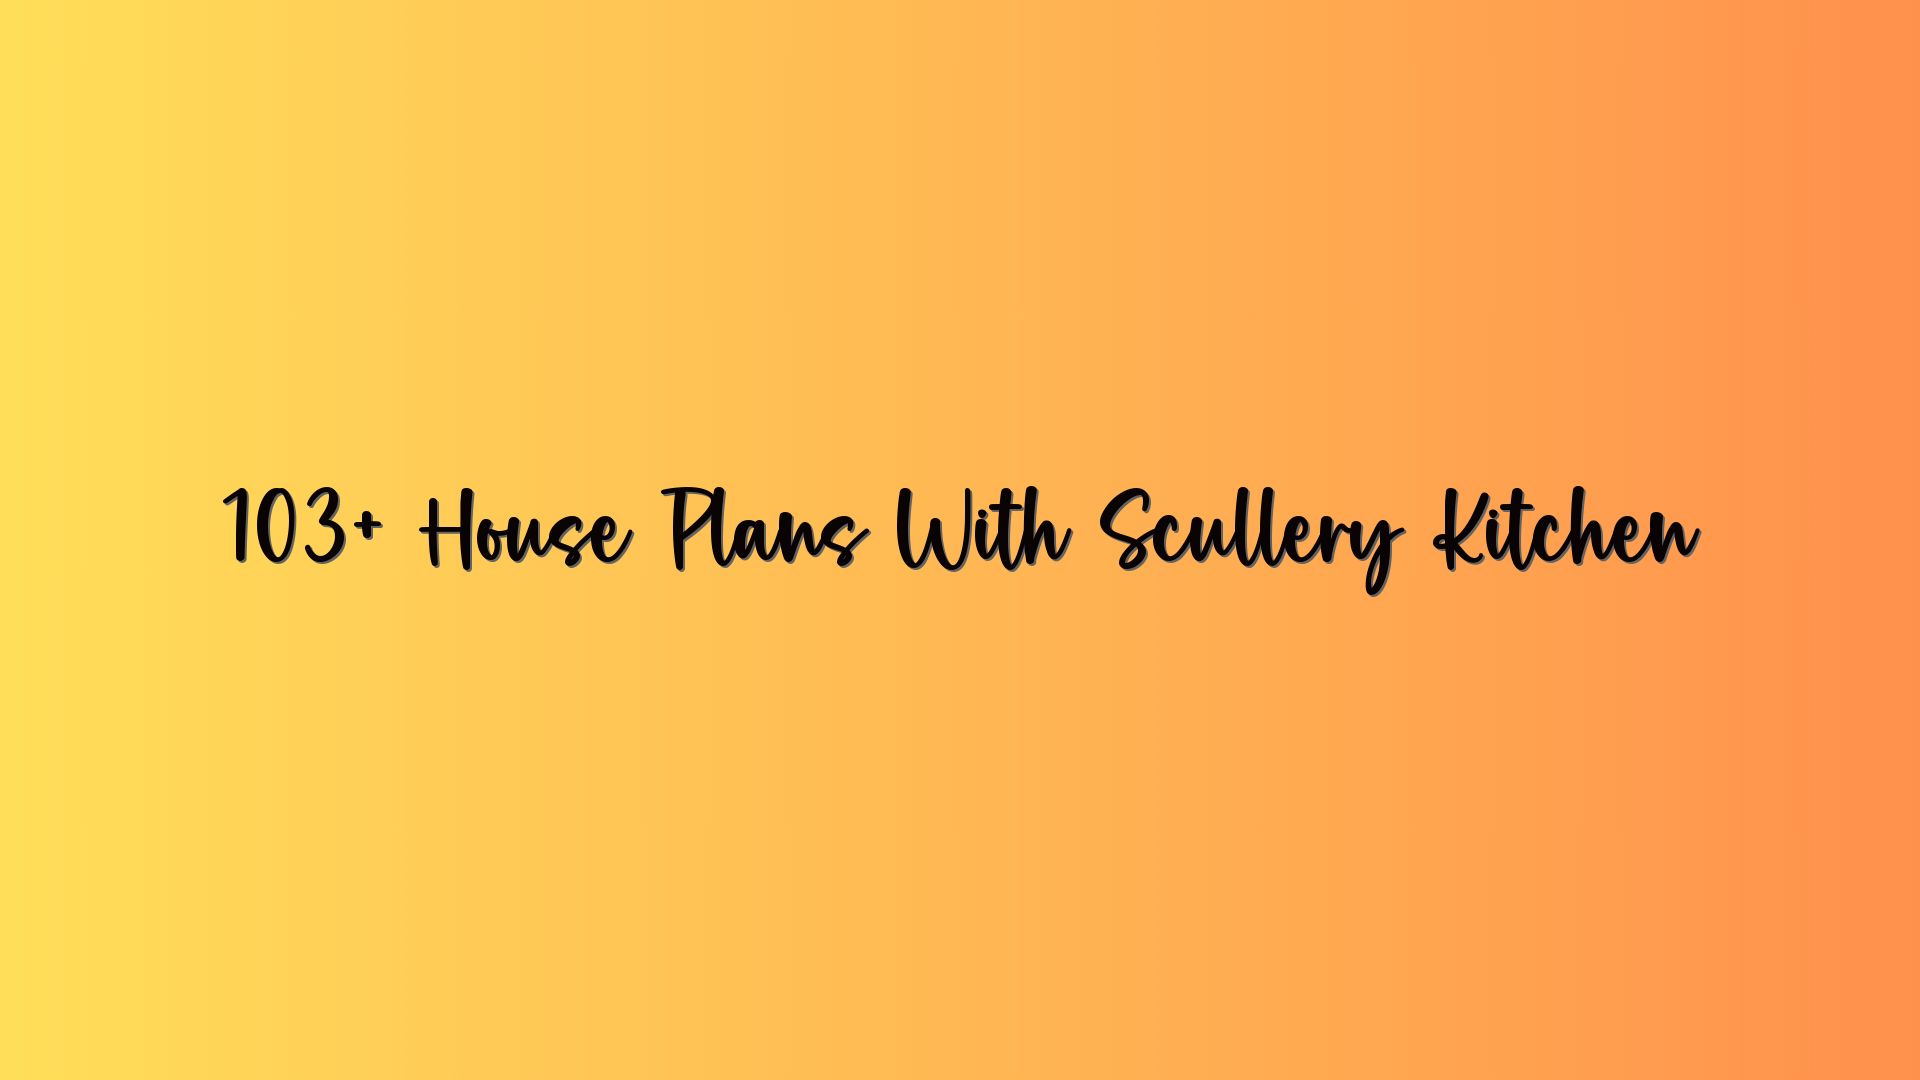 103+ House Plans With Scullery Kitchen